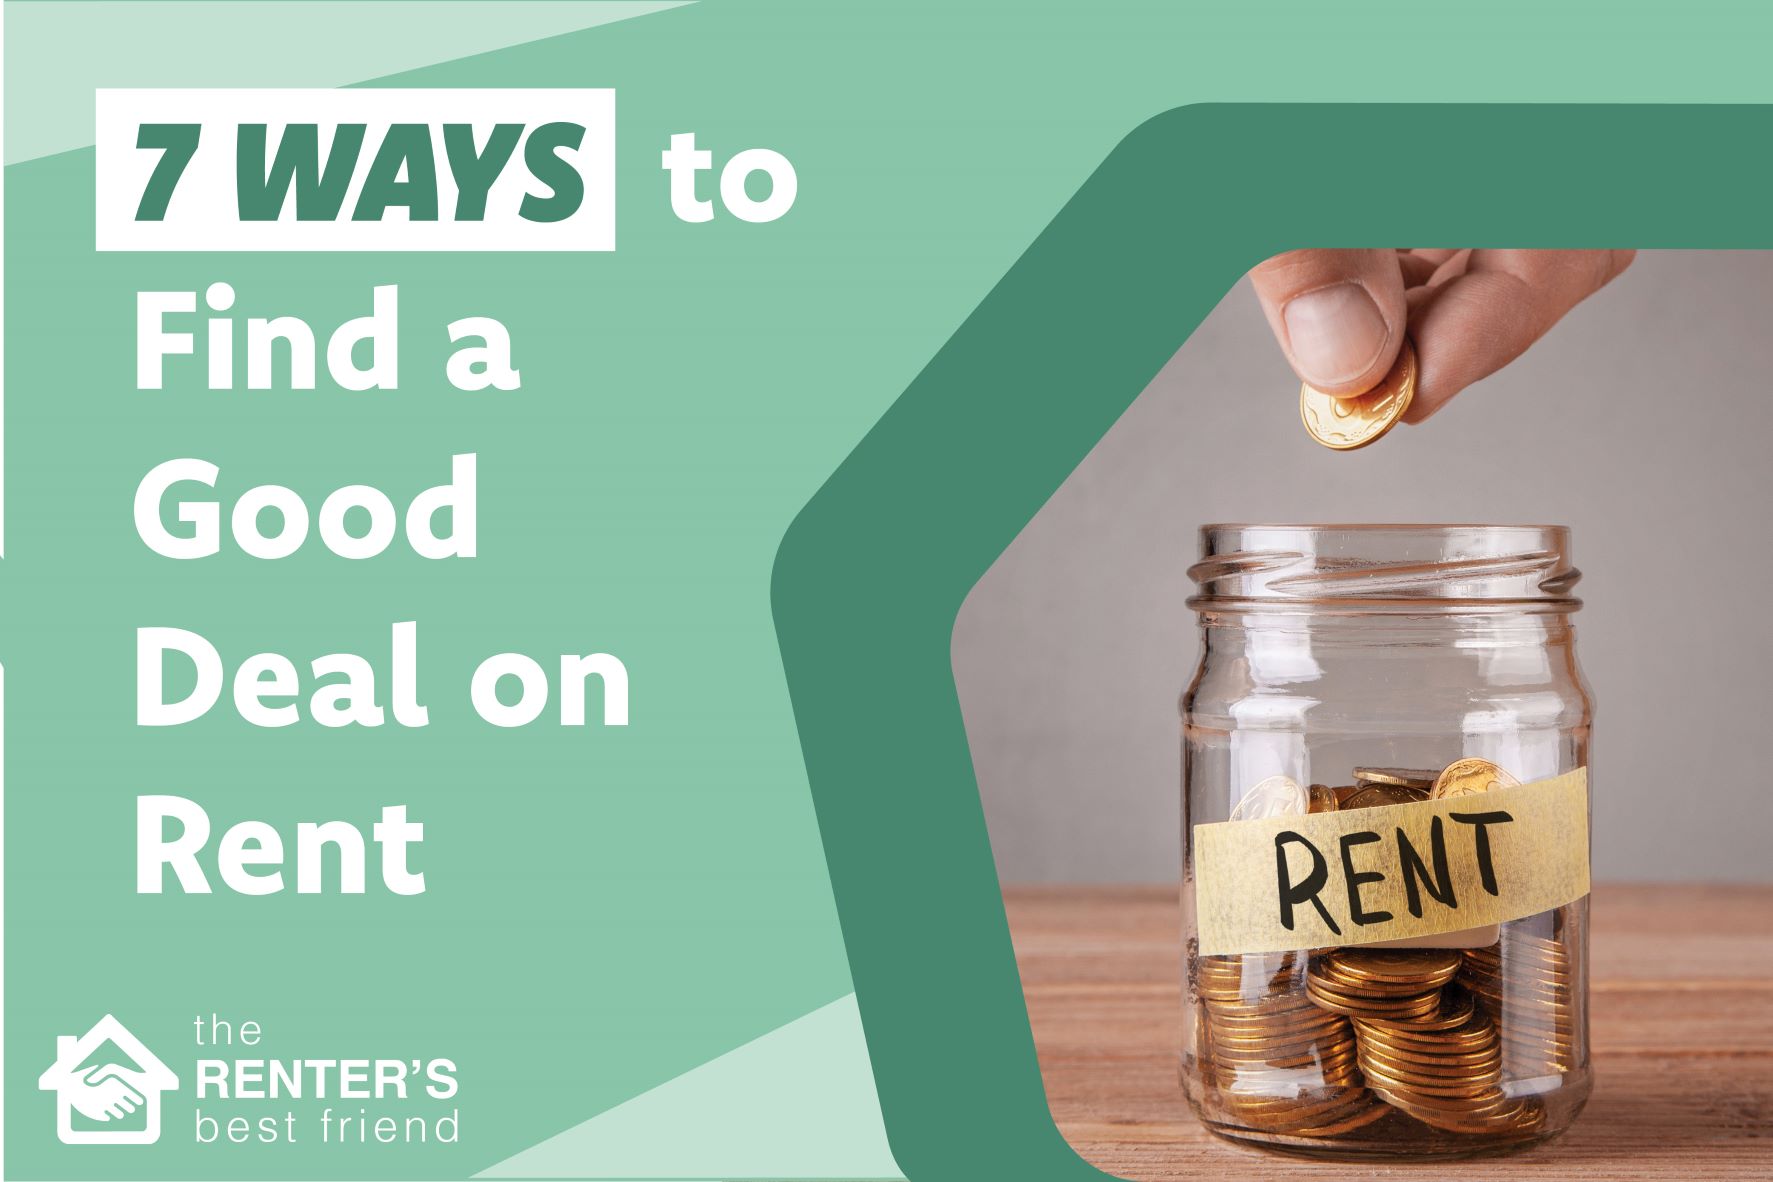 7 ways to find a good deal on rent